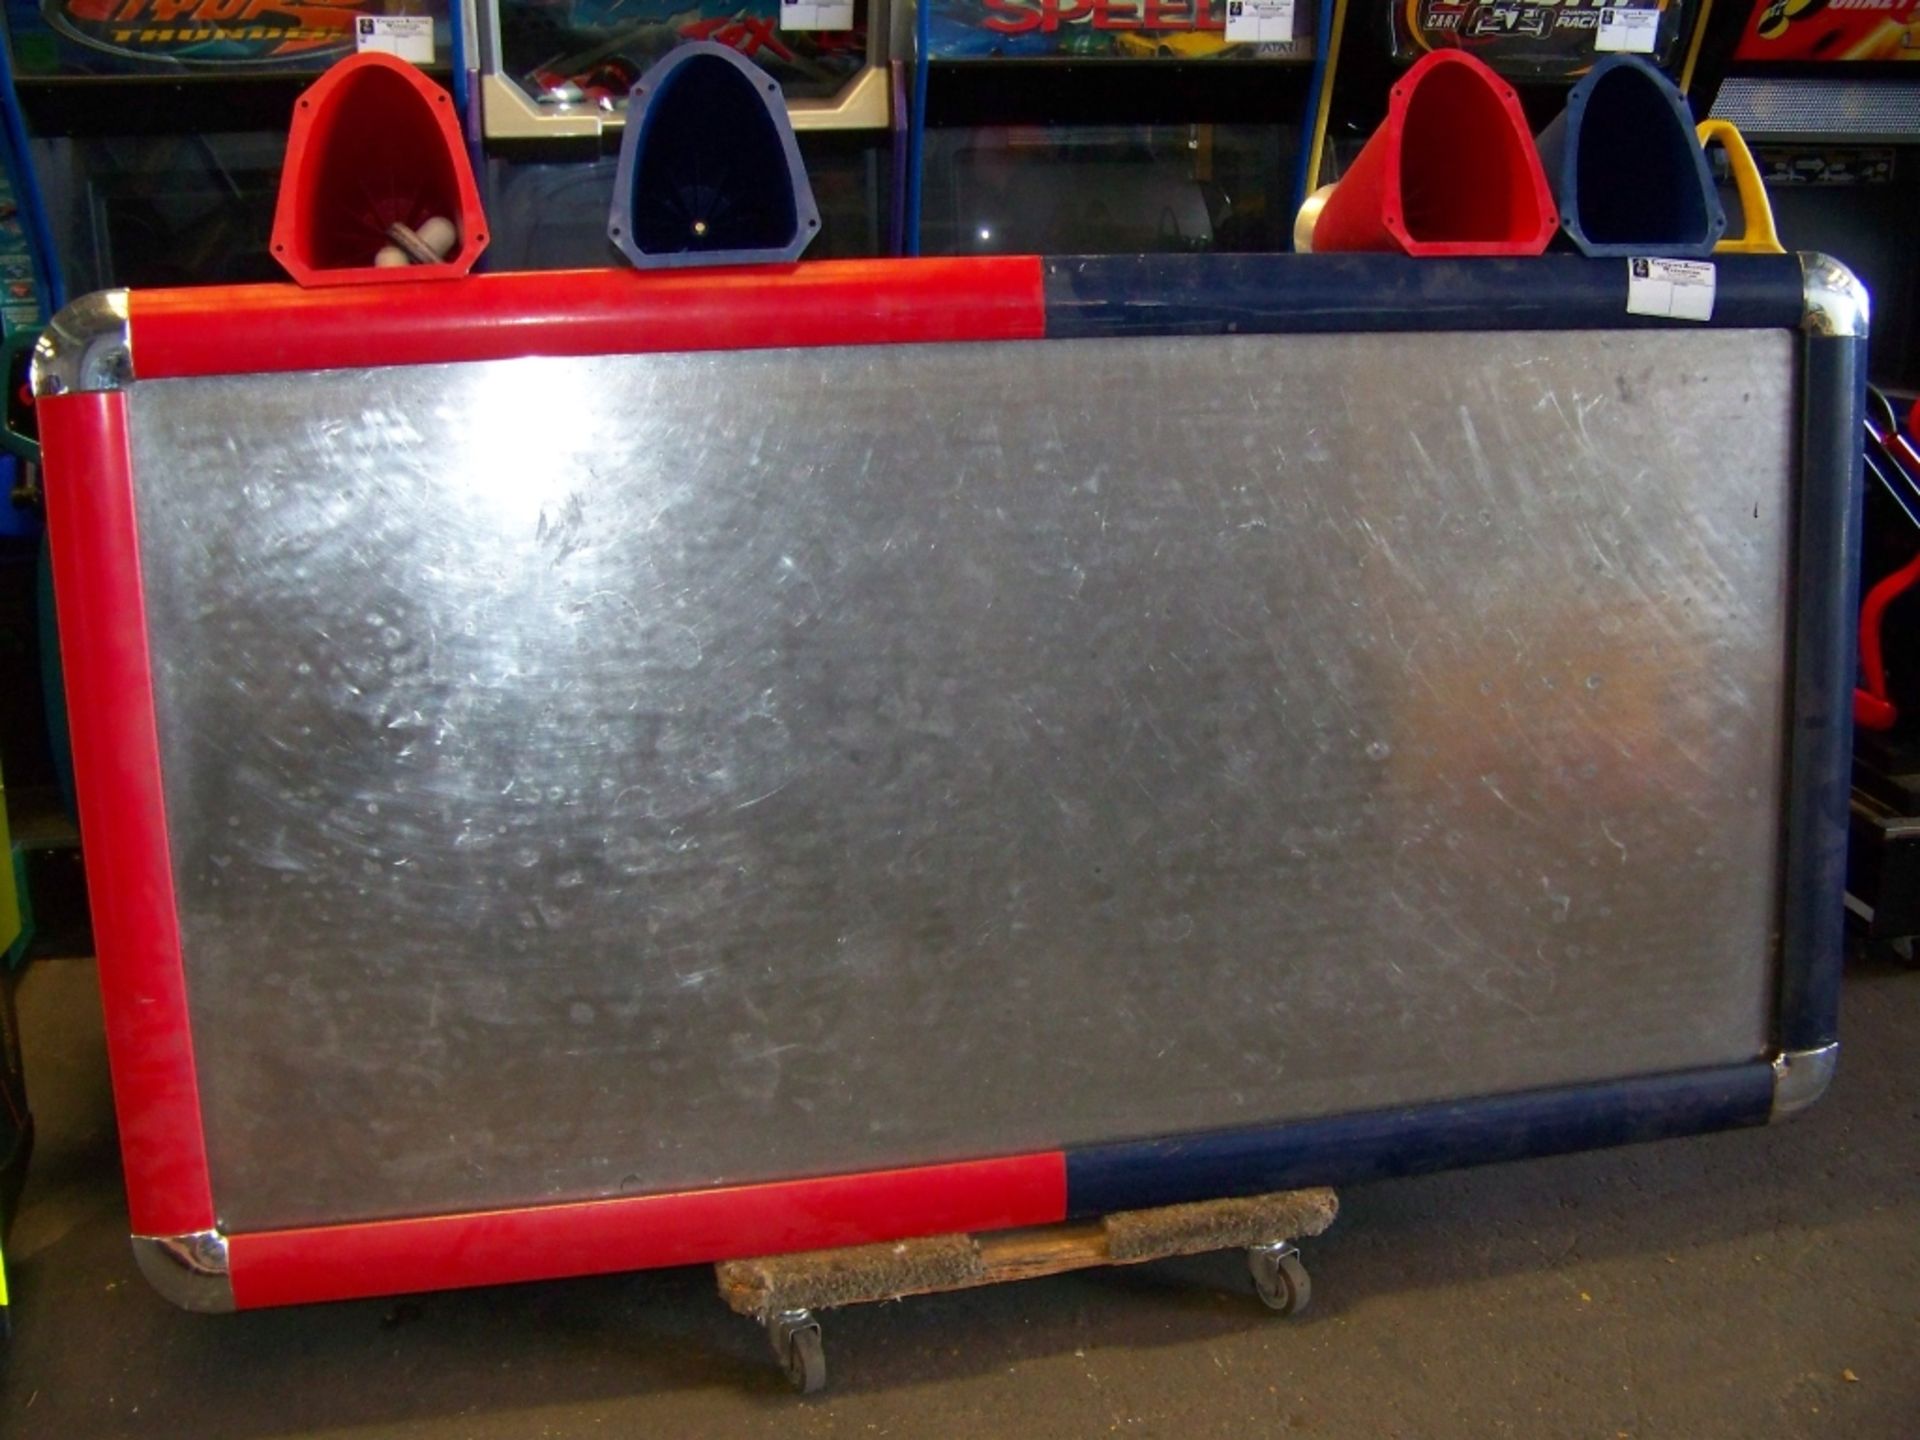 AIR HOCKEY FAST TRACK TABLE W/OVER HEAD I.C.E. Item is in used condition. Evidence of wear and